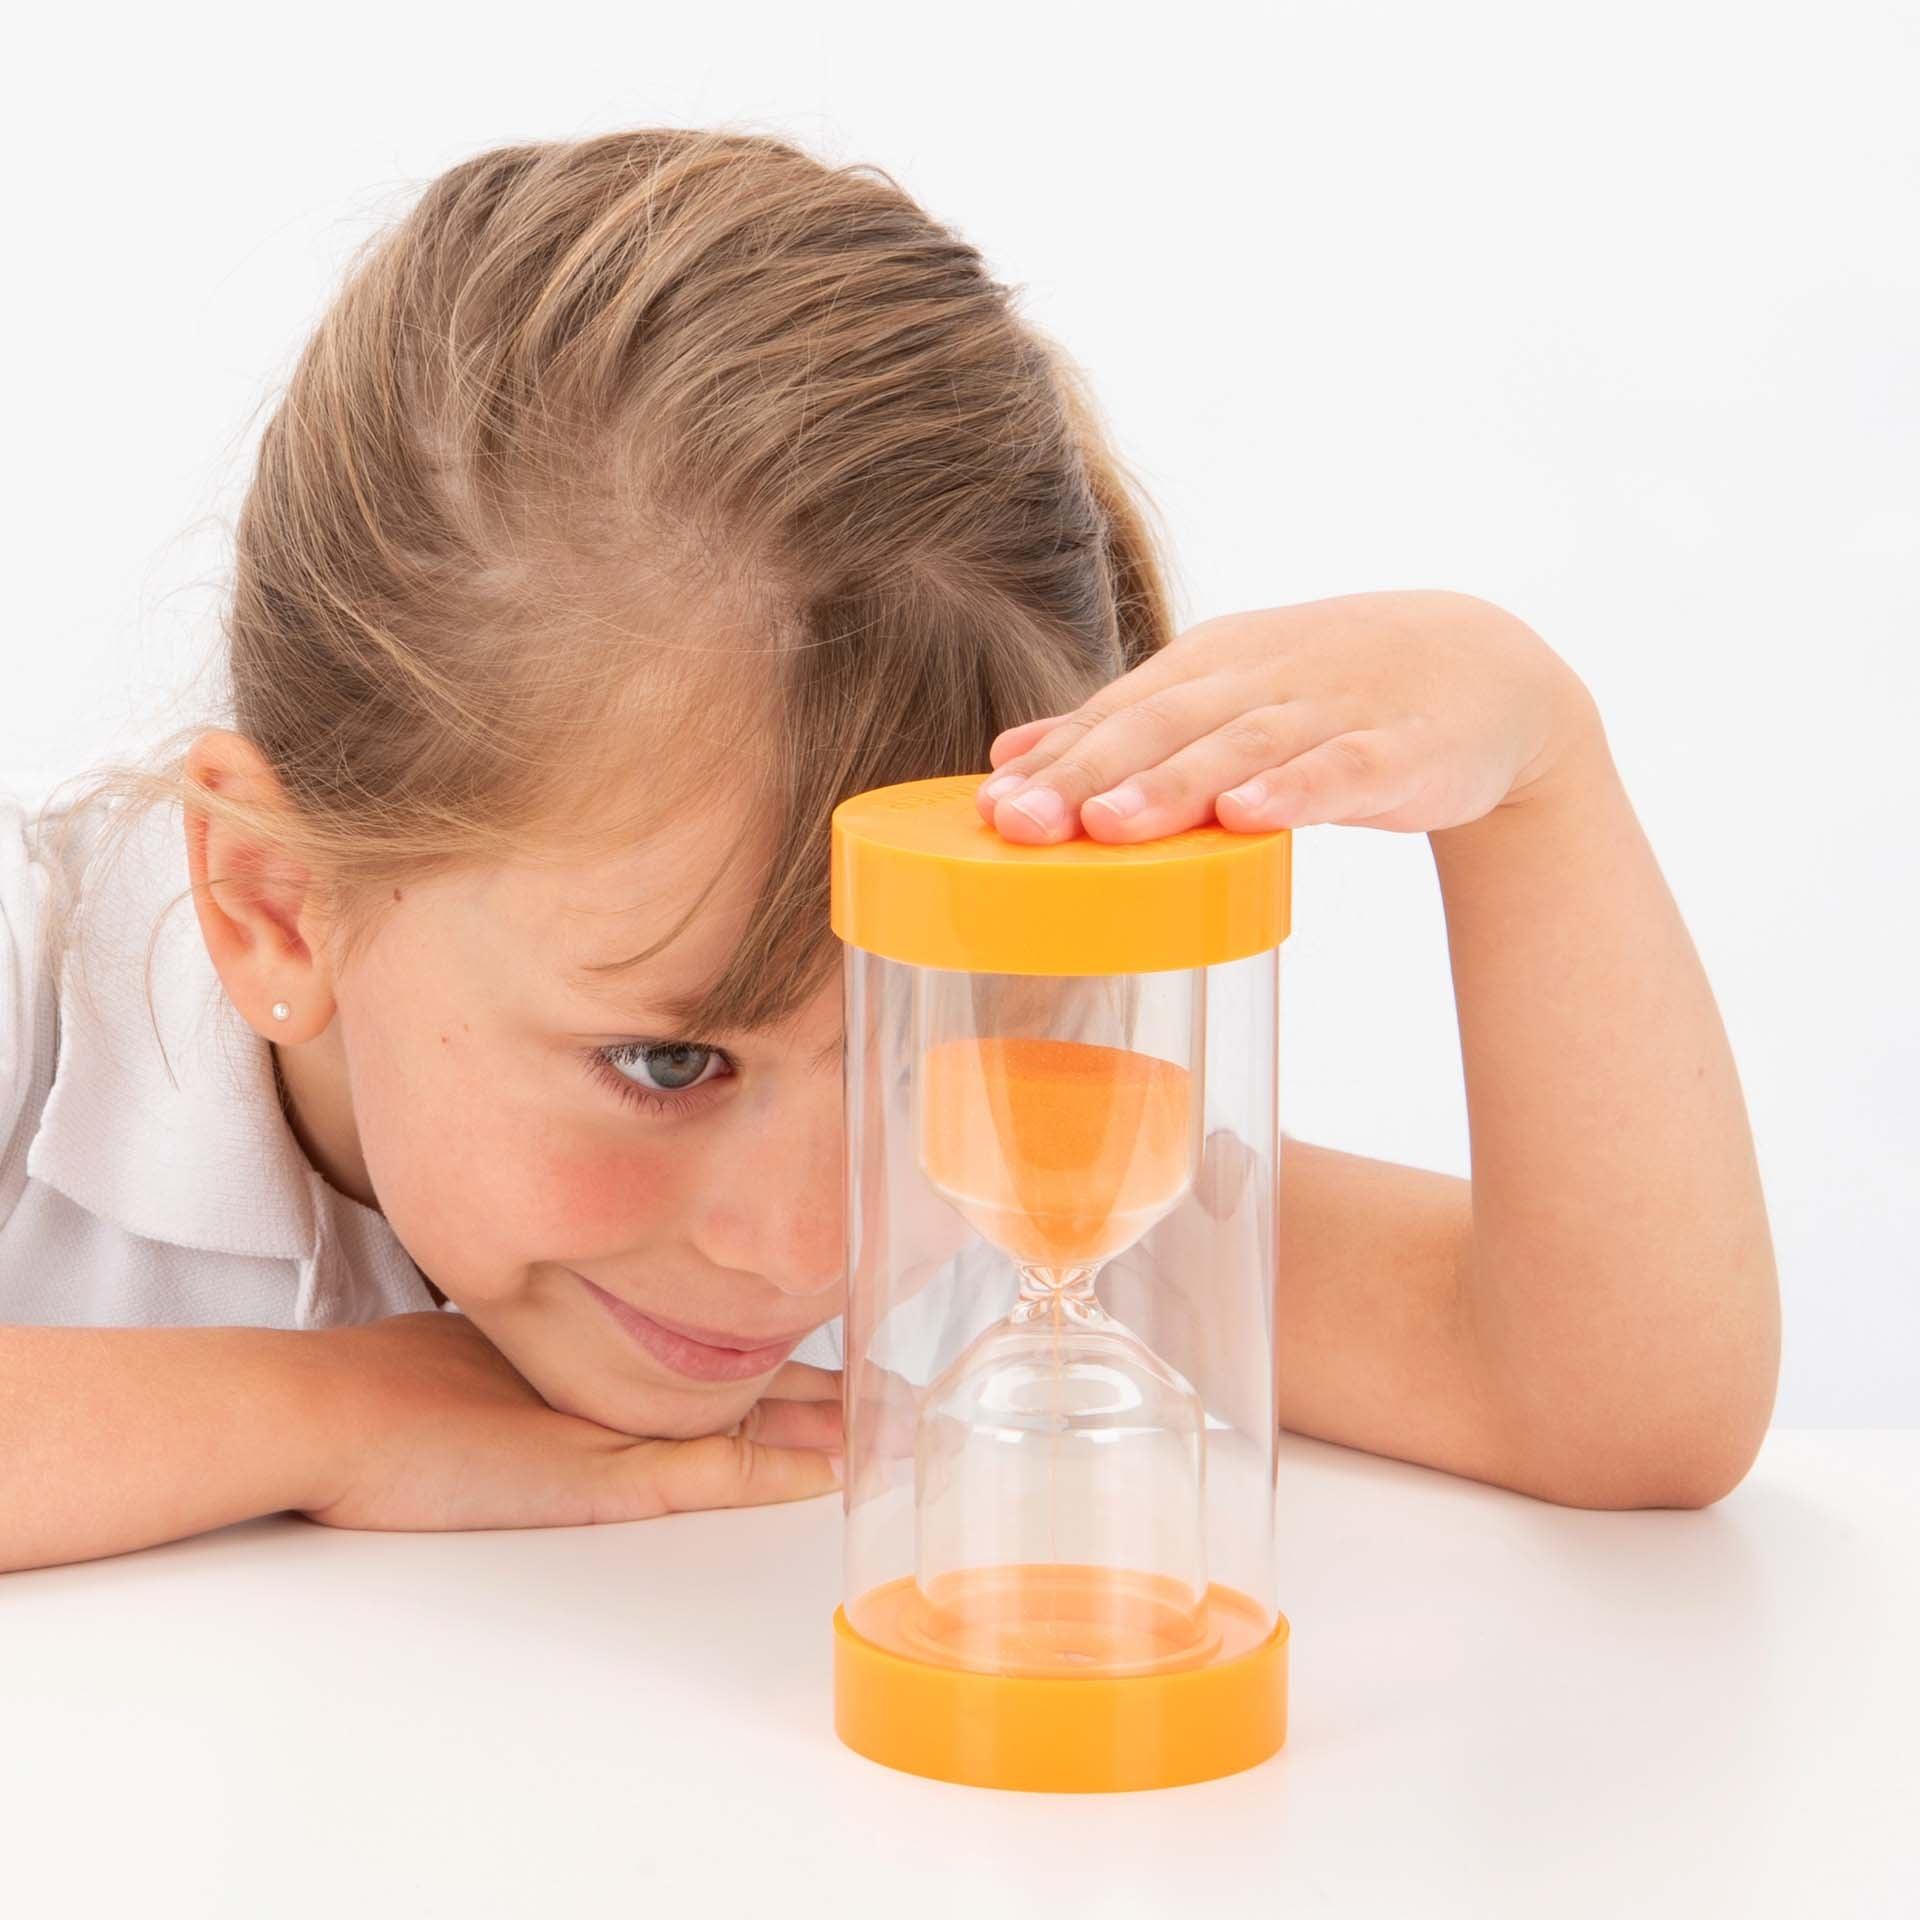 TickiT Colour Bright Sand Timer 10 Minute, Our new TickiT ColourBright Sand Timer 10 Minute timer is a robust sand timers offer the same traditional visual demonstration of the passing of time, but with a new rounded design including a shatterproof plastic barrier to protect the sleek modernised glass bulb inside. Easy to understand for young children, ideal for use in timed games or activities and for timing experiments in maths or science. The TickiT ColourBright Sand Timer 10 Minute is colour coded to ma